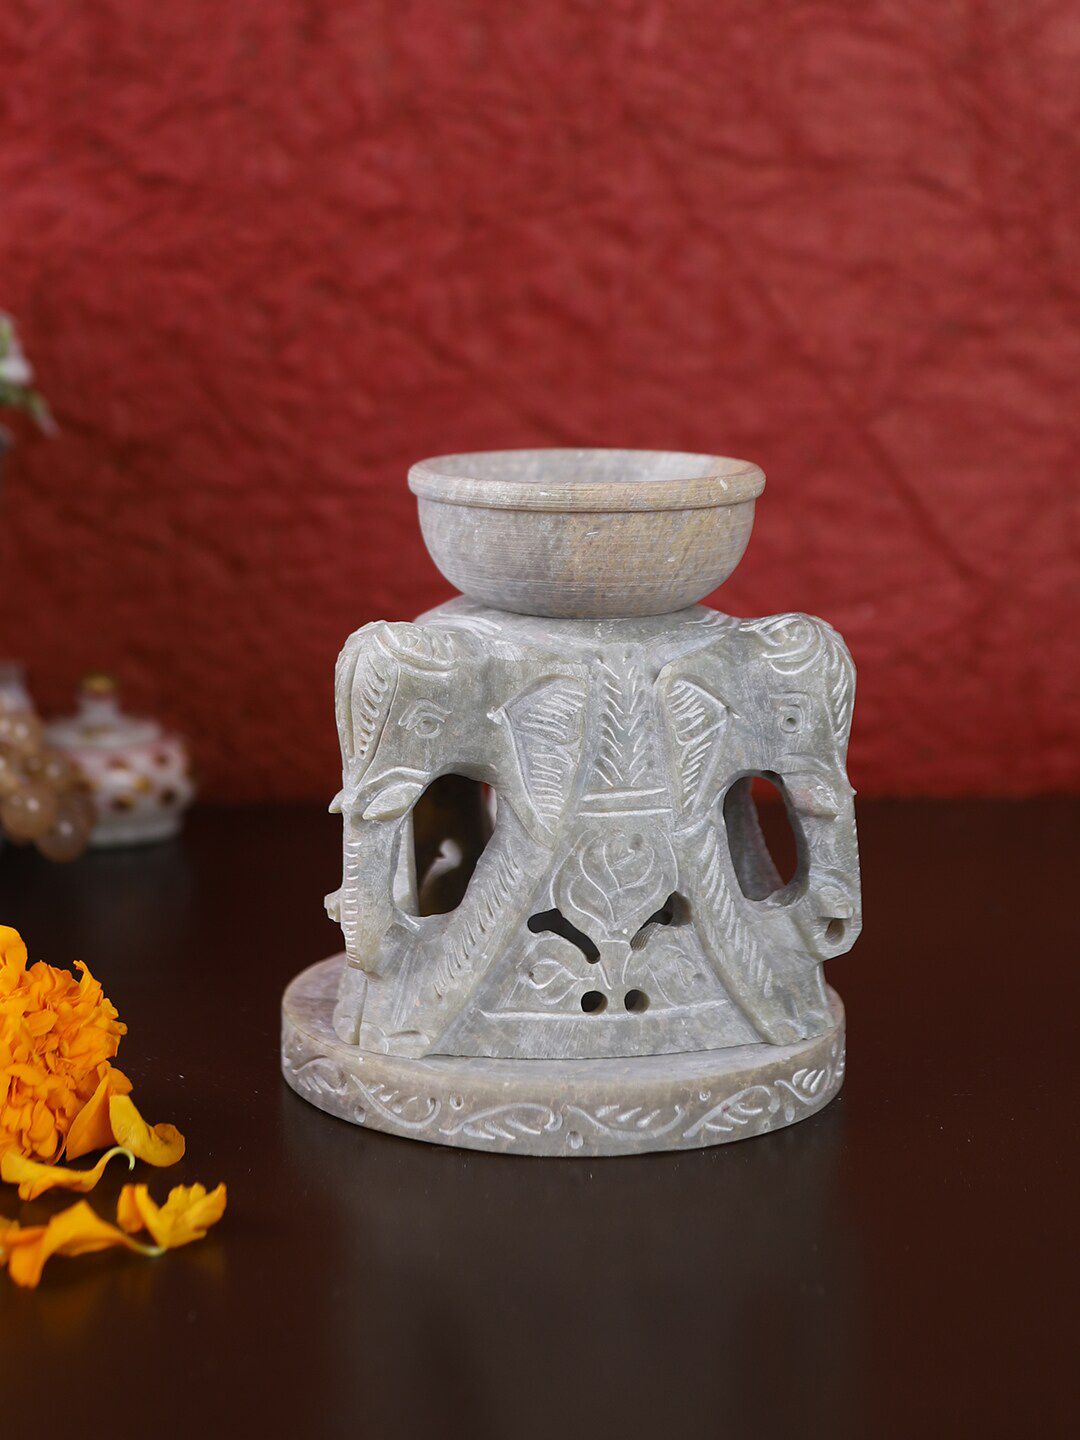 Aapno Rajasthan Tealight Holder With Oil Diffuser Price in India